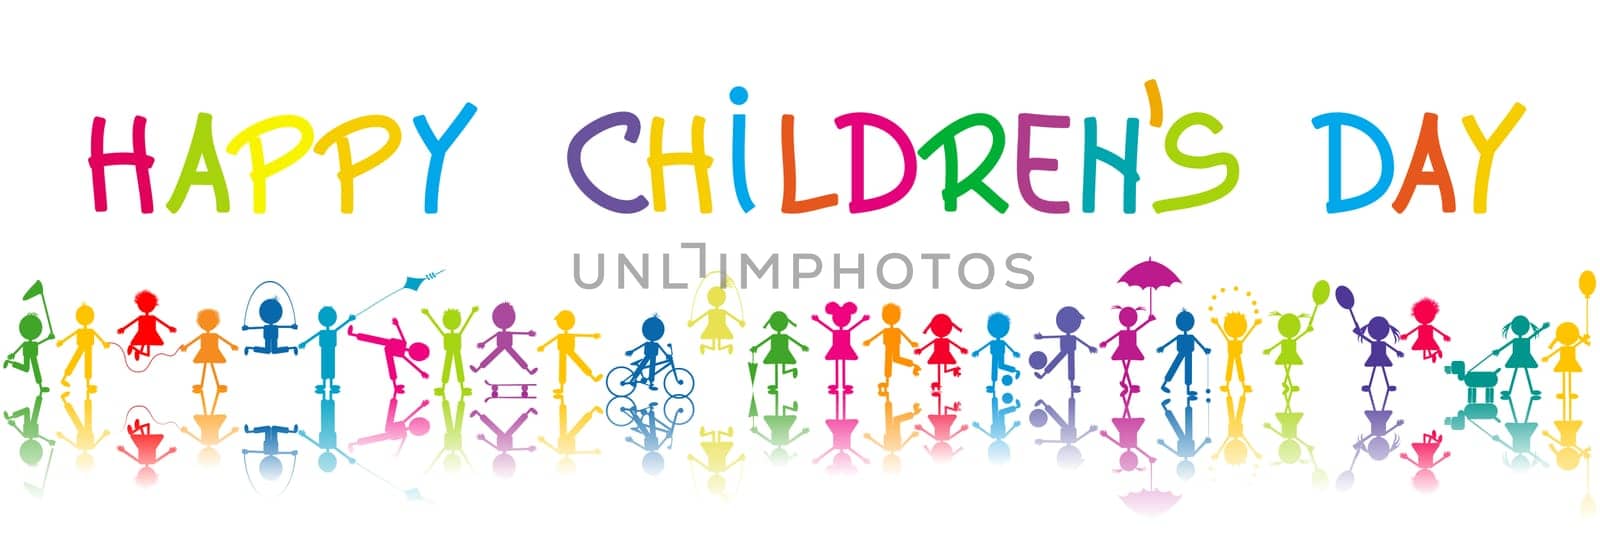 Happy Children's Day poster with stylized children with shadows playing by hibrida13